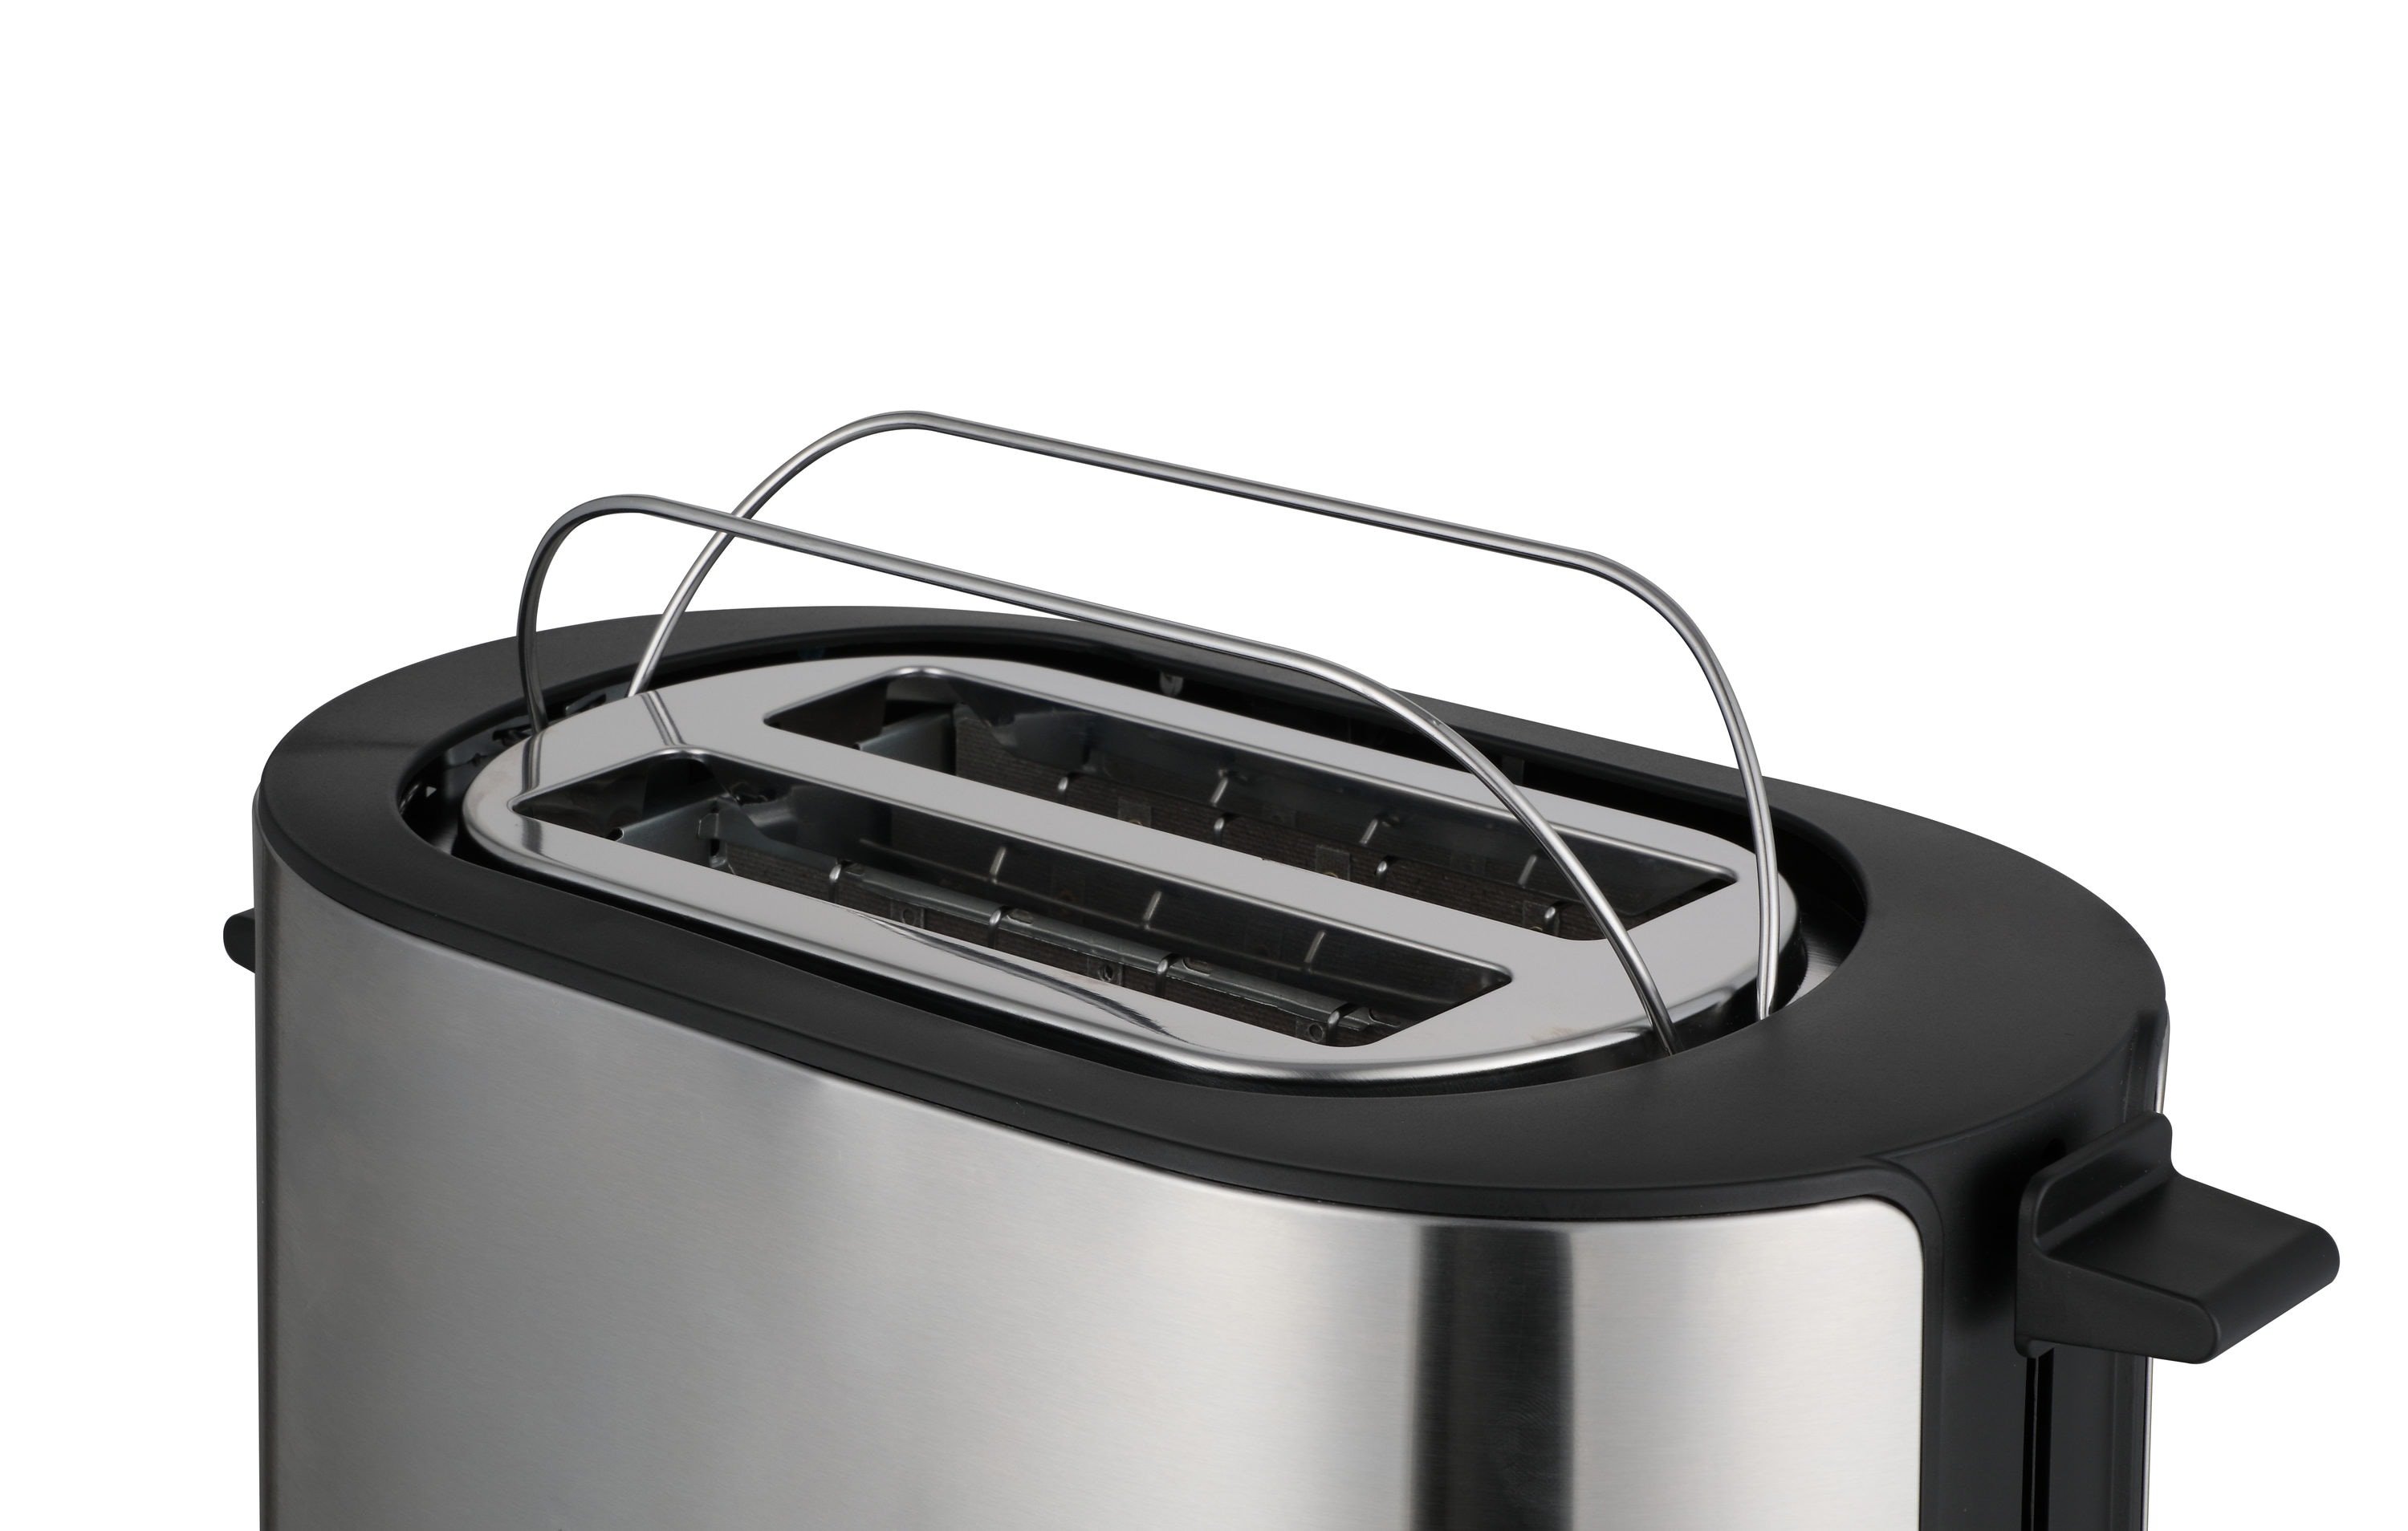 Severin Automatic Long Slot Toaster 4 Slice 1400W Brushed